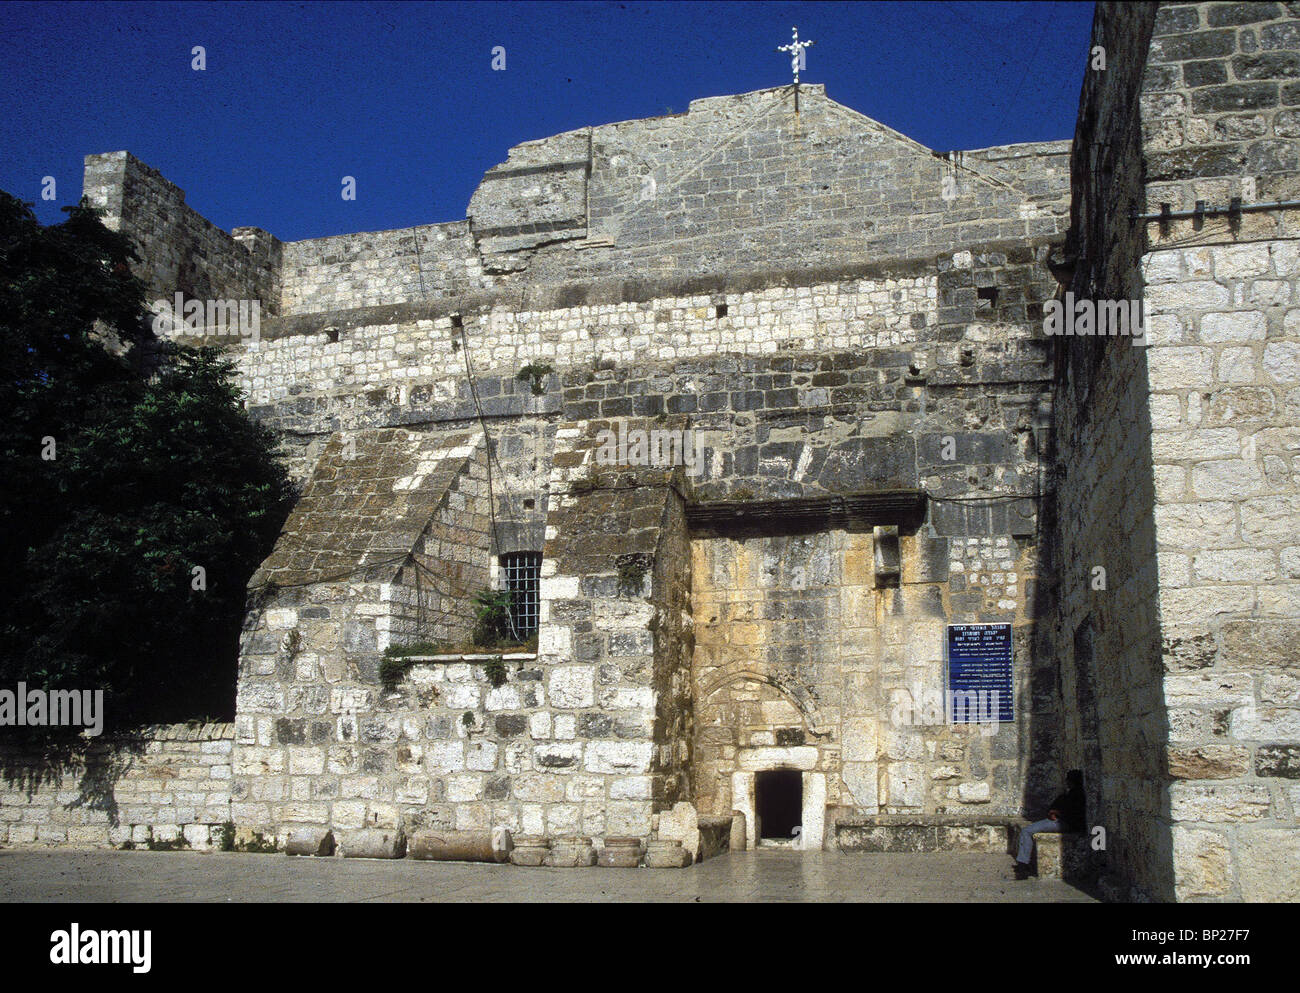 MAIN ENTRANCE TO THE BASILICA OF THE CHURCH OF NATIVITY. THERE ARE THREE GATES VISIBLE ON THIS ANCIENT (BYZANTINE) WALL: THE Stock Photo